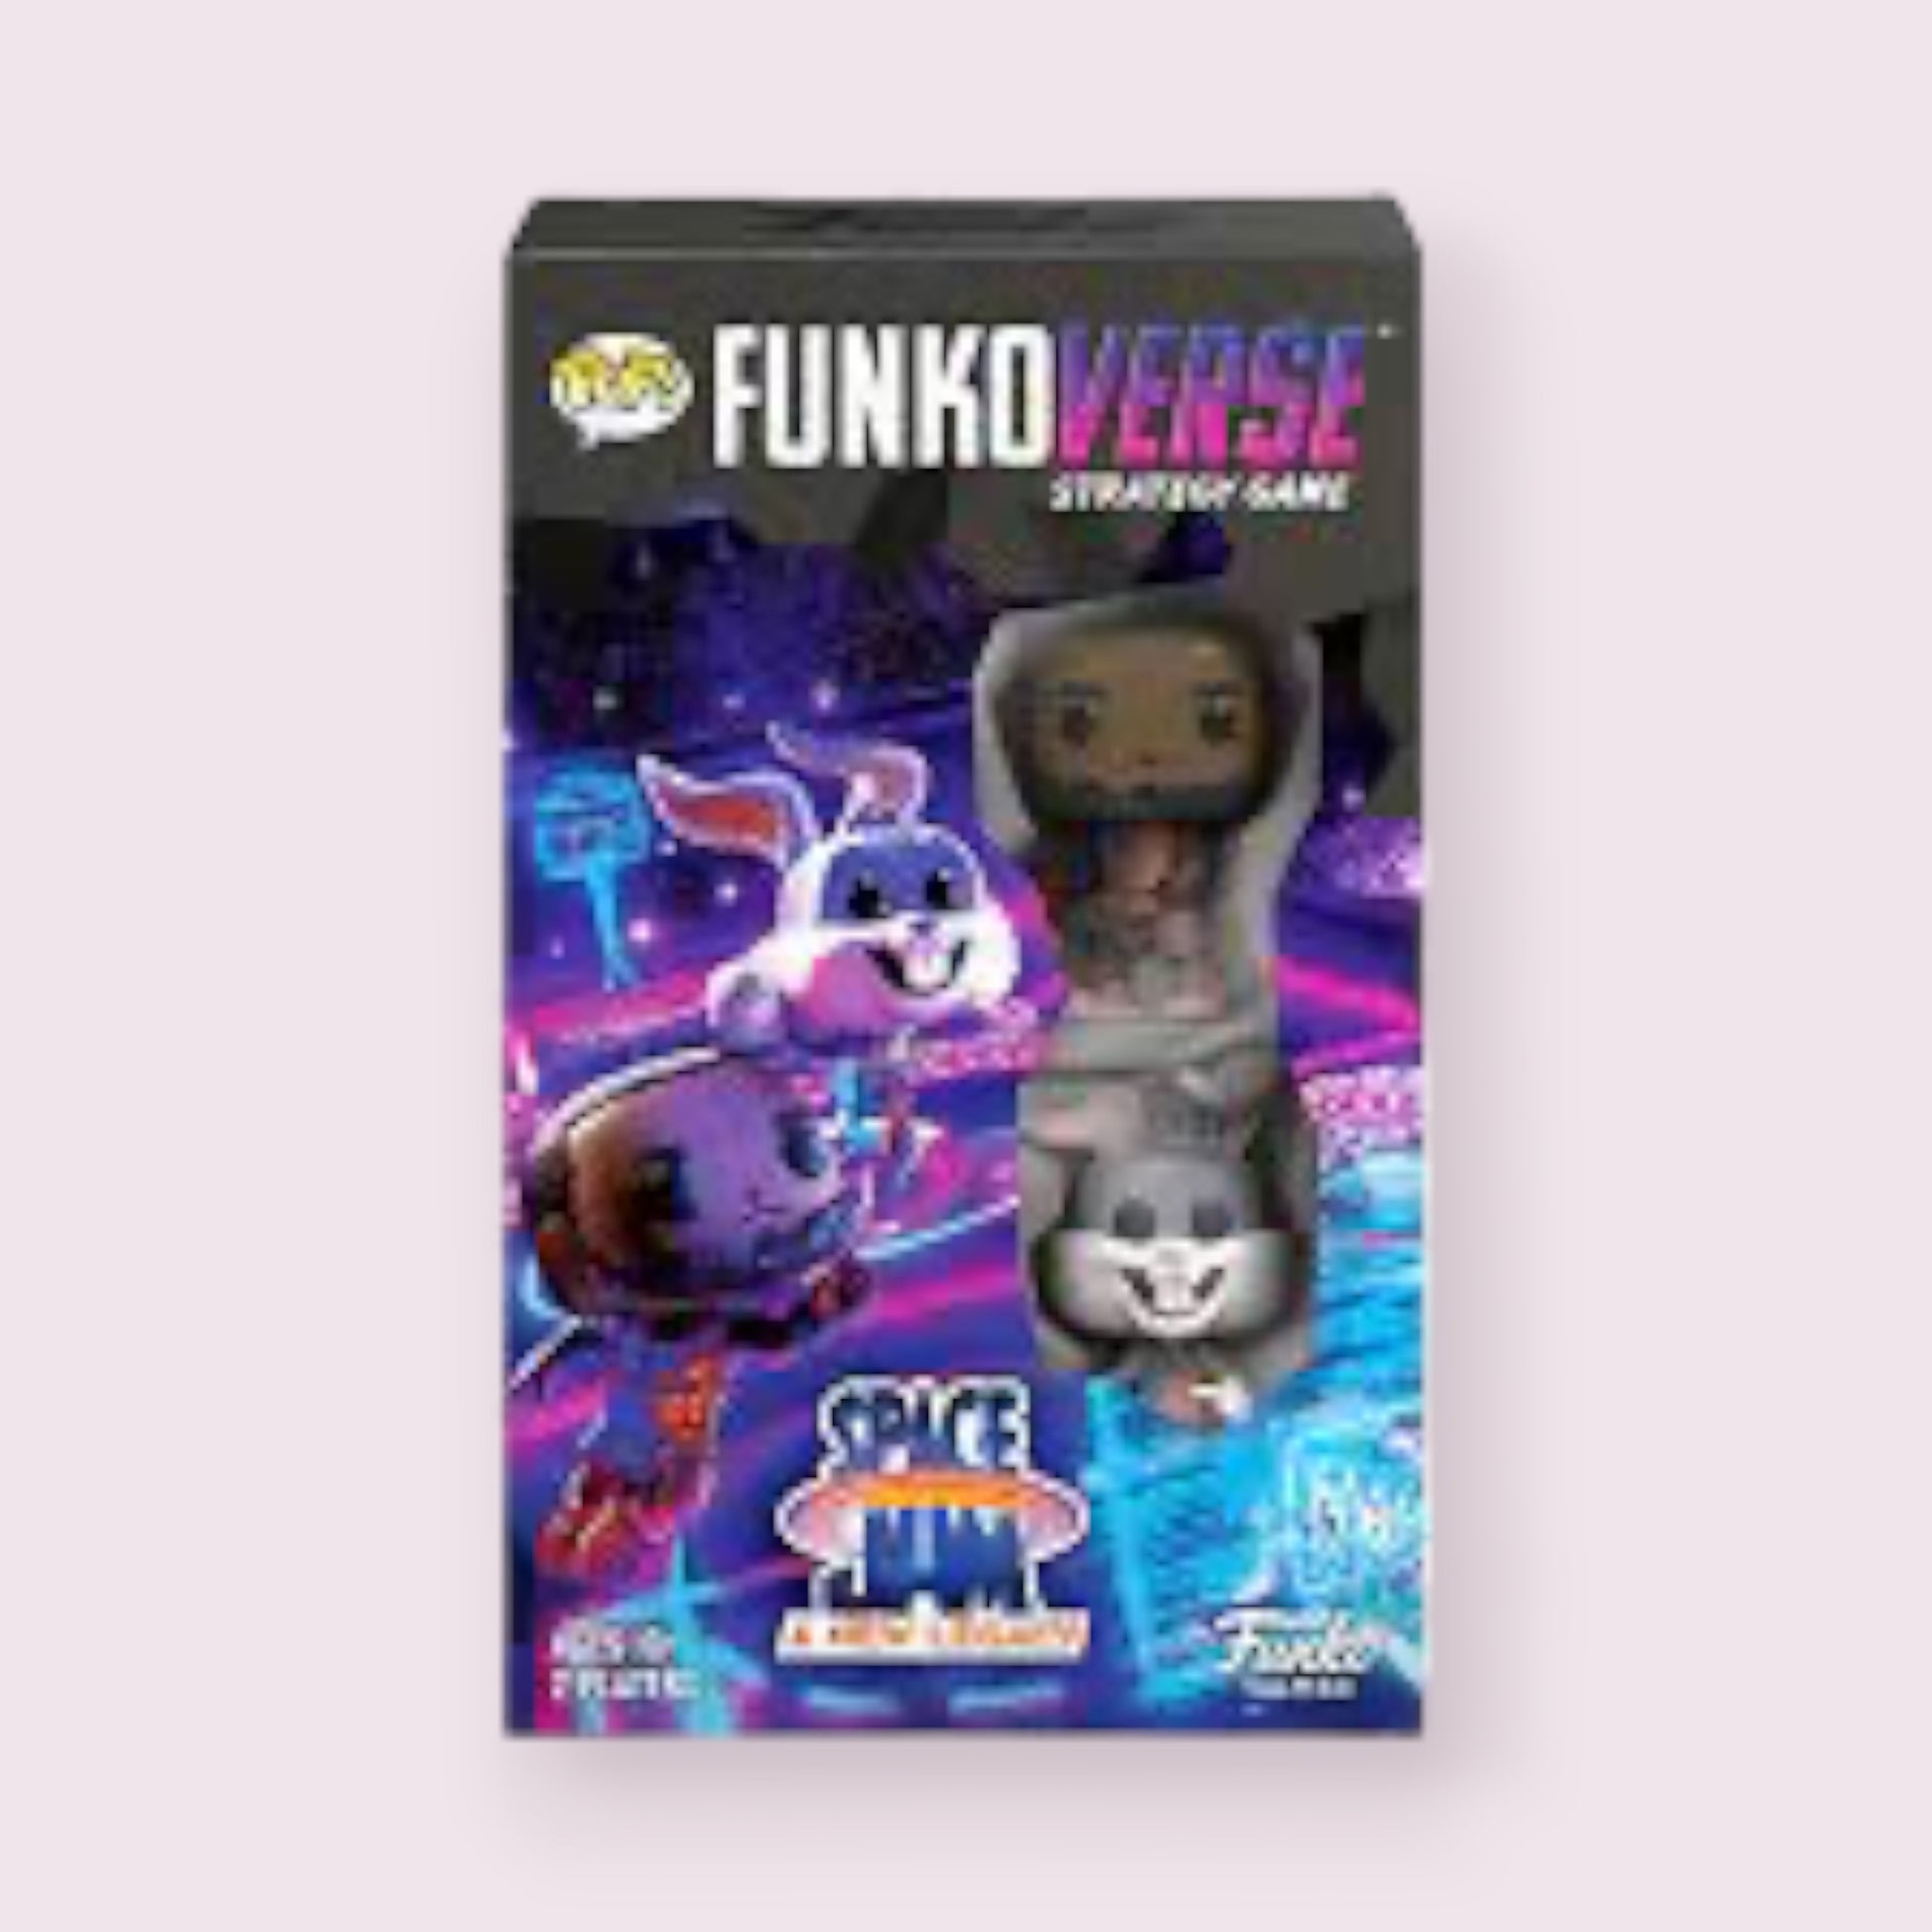 FunkoVerse Space Jam Game  Pixie Candy Shoppe   